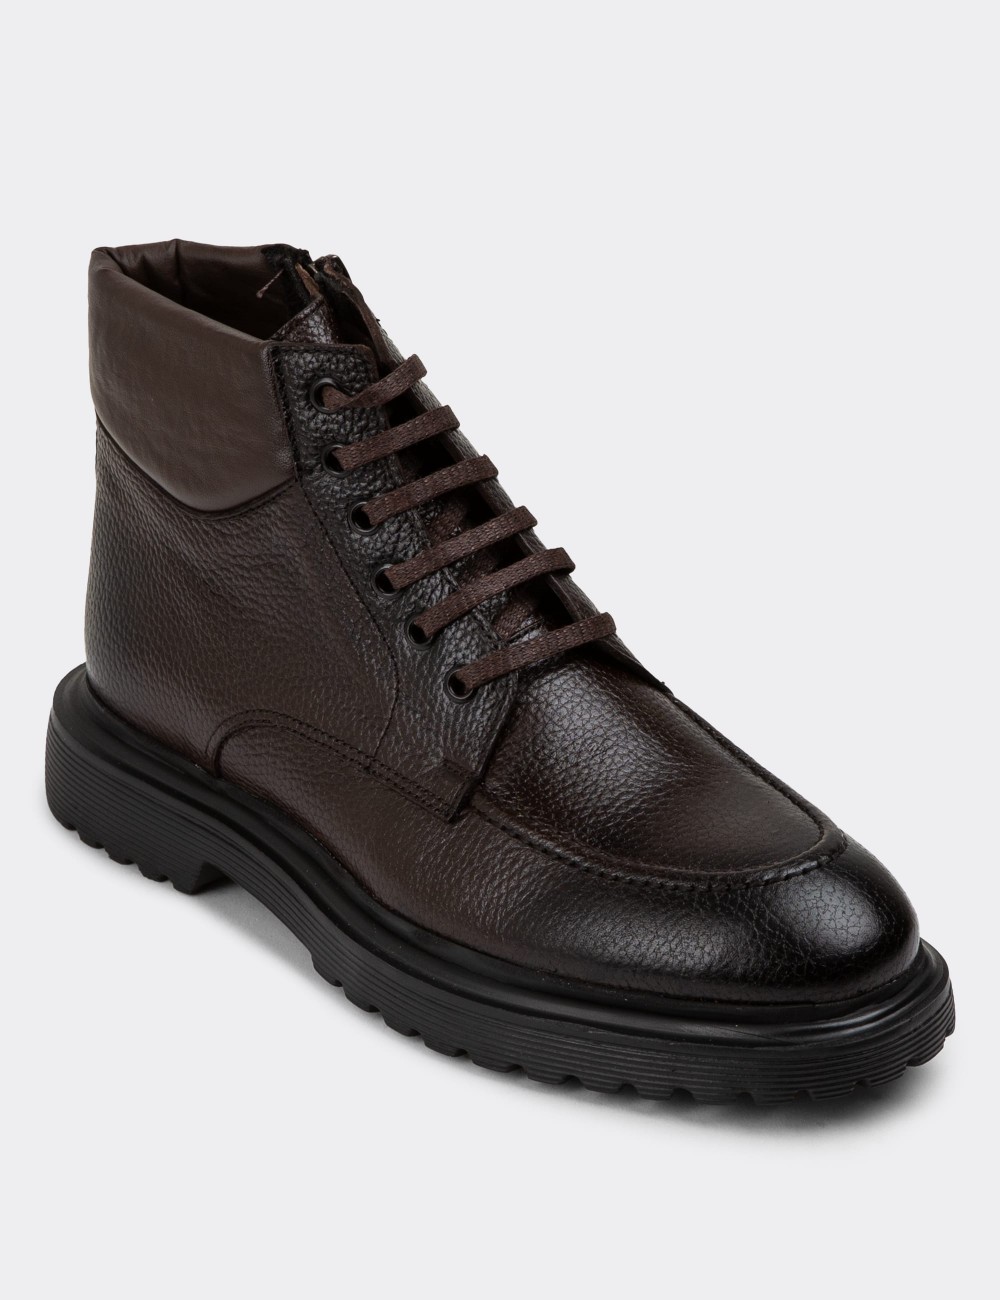 Brown Leather Boots - 01929MKHVE02